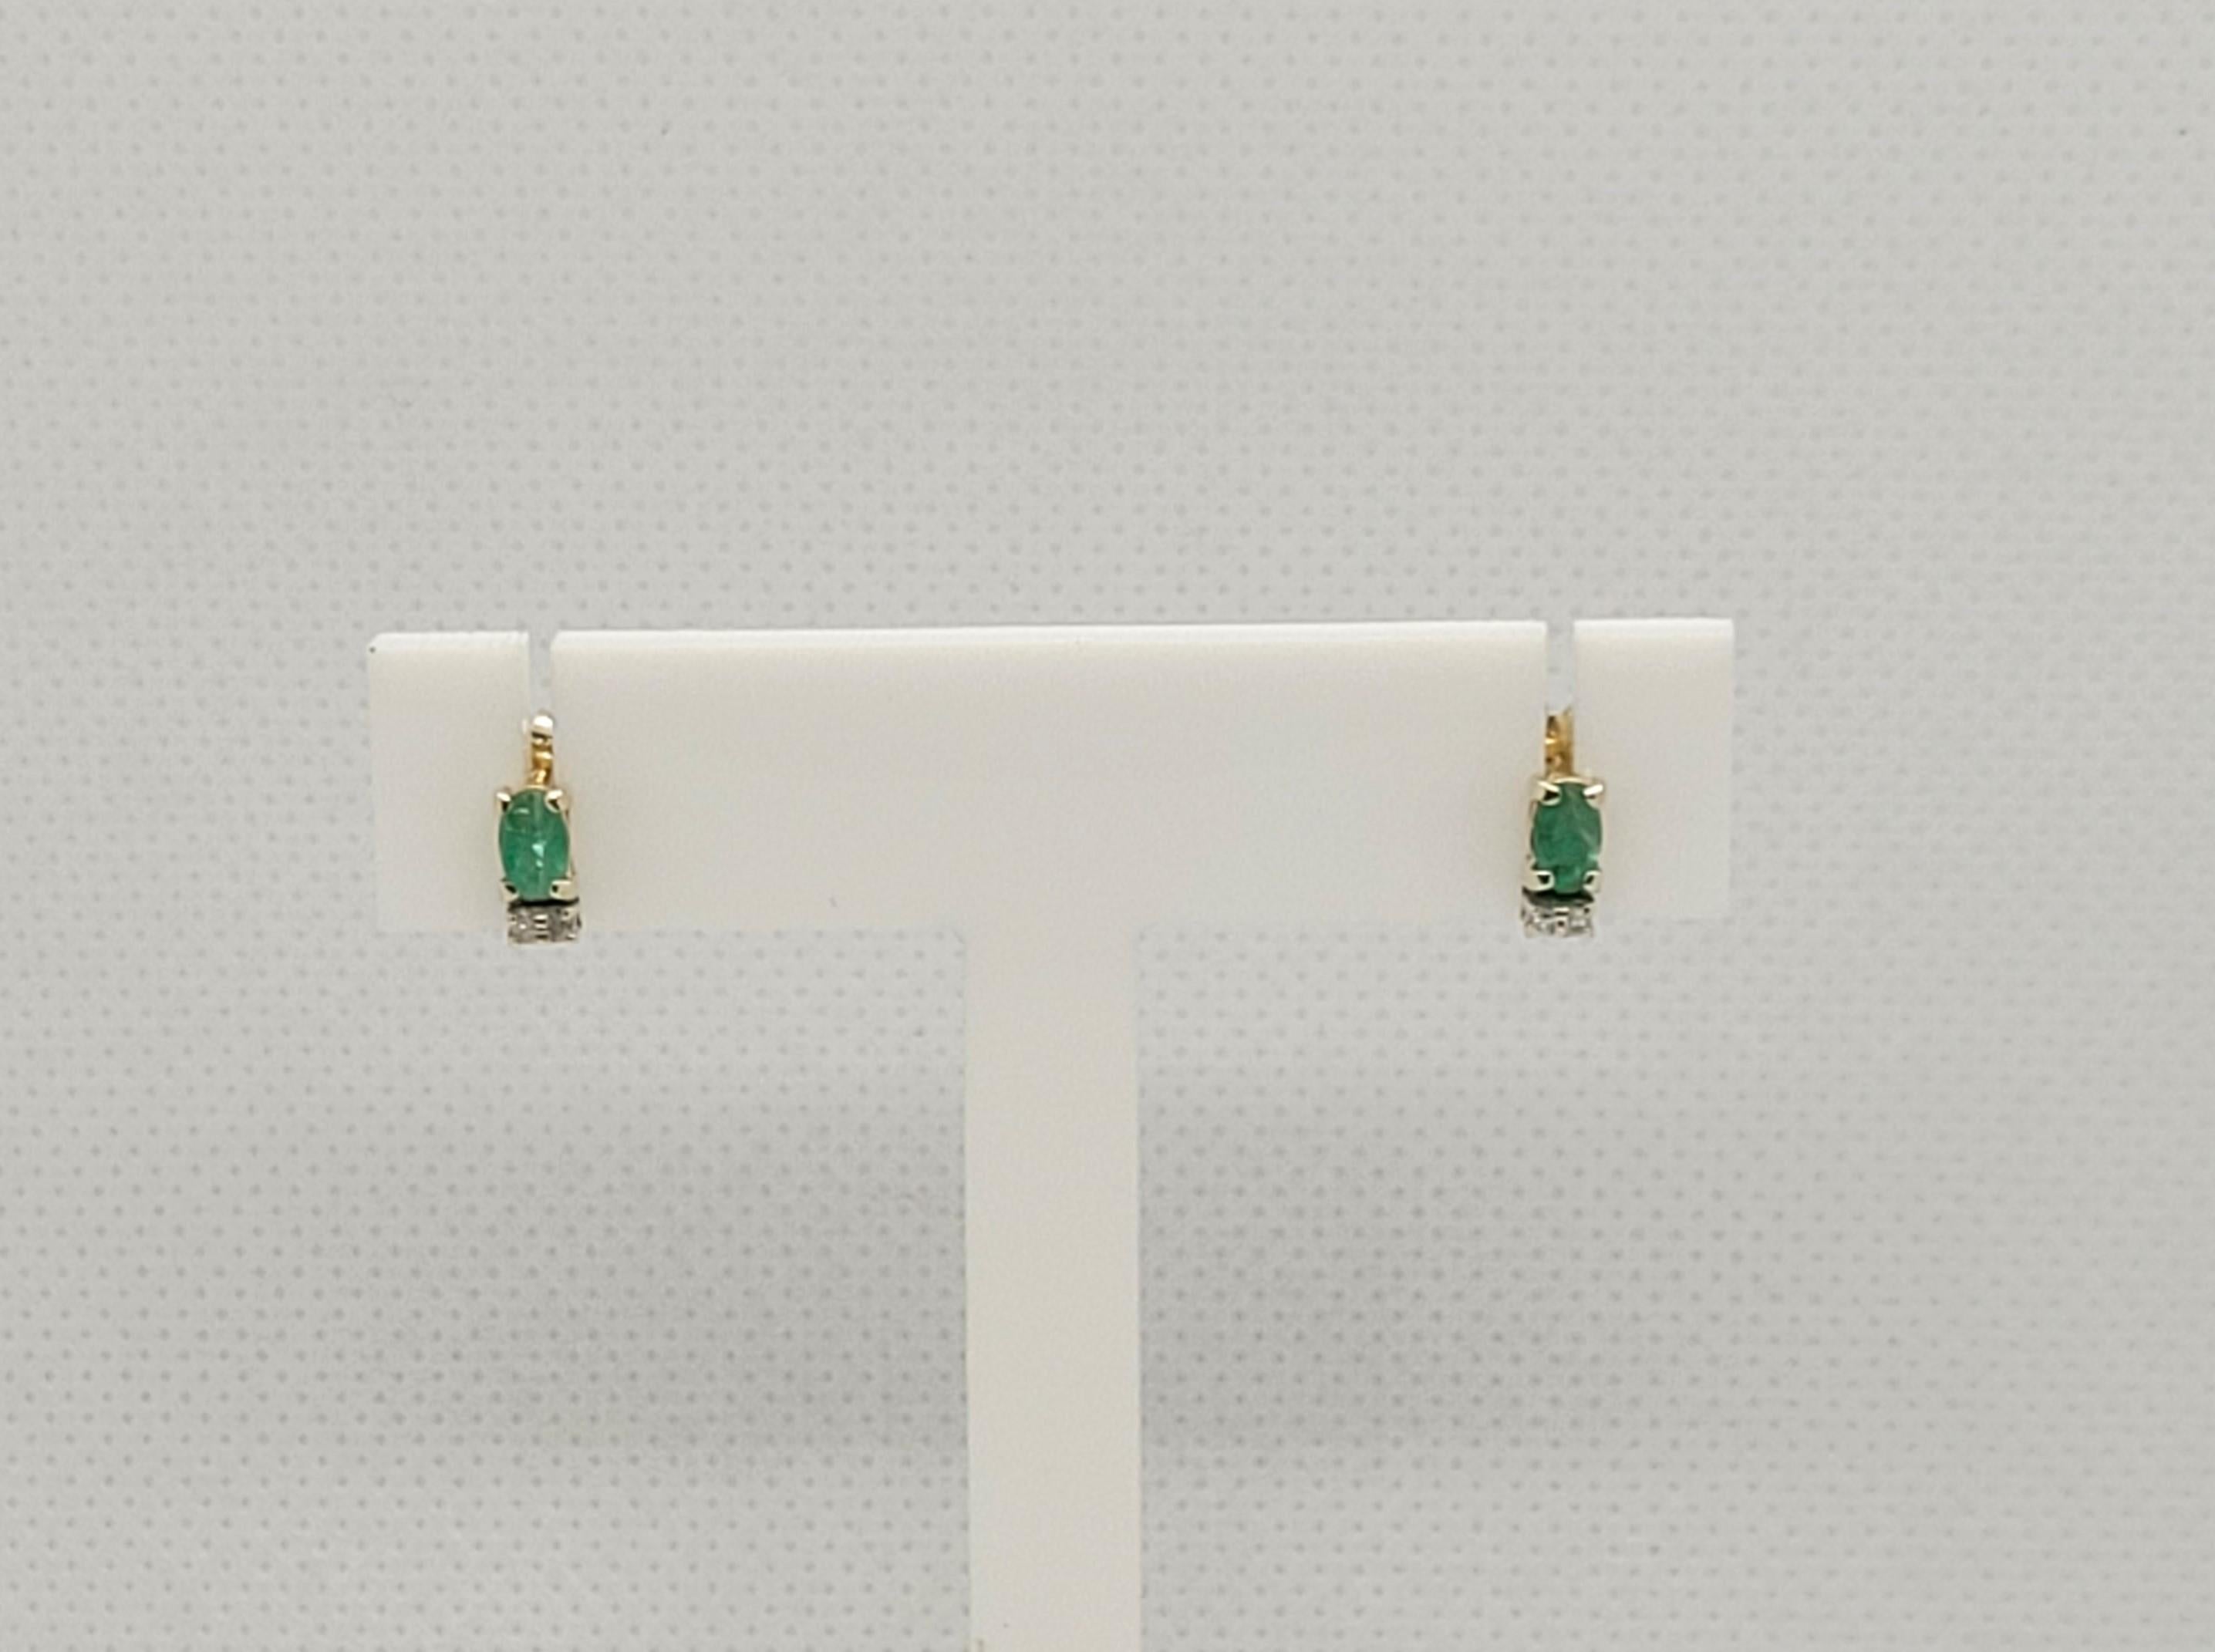 14kt yellow gold friction post earrings with two oblong oval emerald gemstones, and four round single-cut diamonds. The 4.8 x 3mm emerald and 1.2mm diamonds are commercial grade (fair-quality with visible inclusions), I clarity, and K color. The